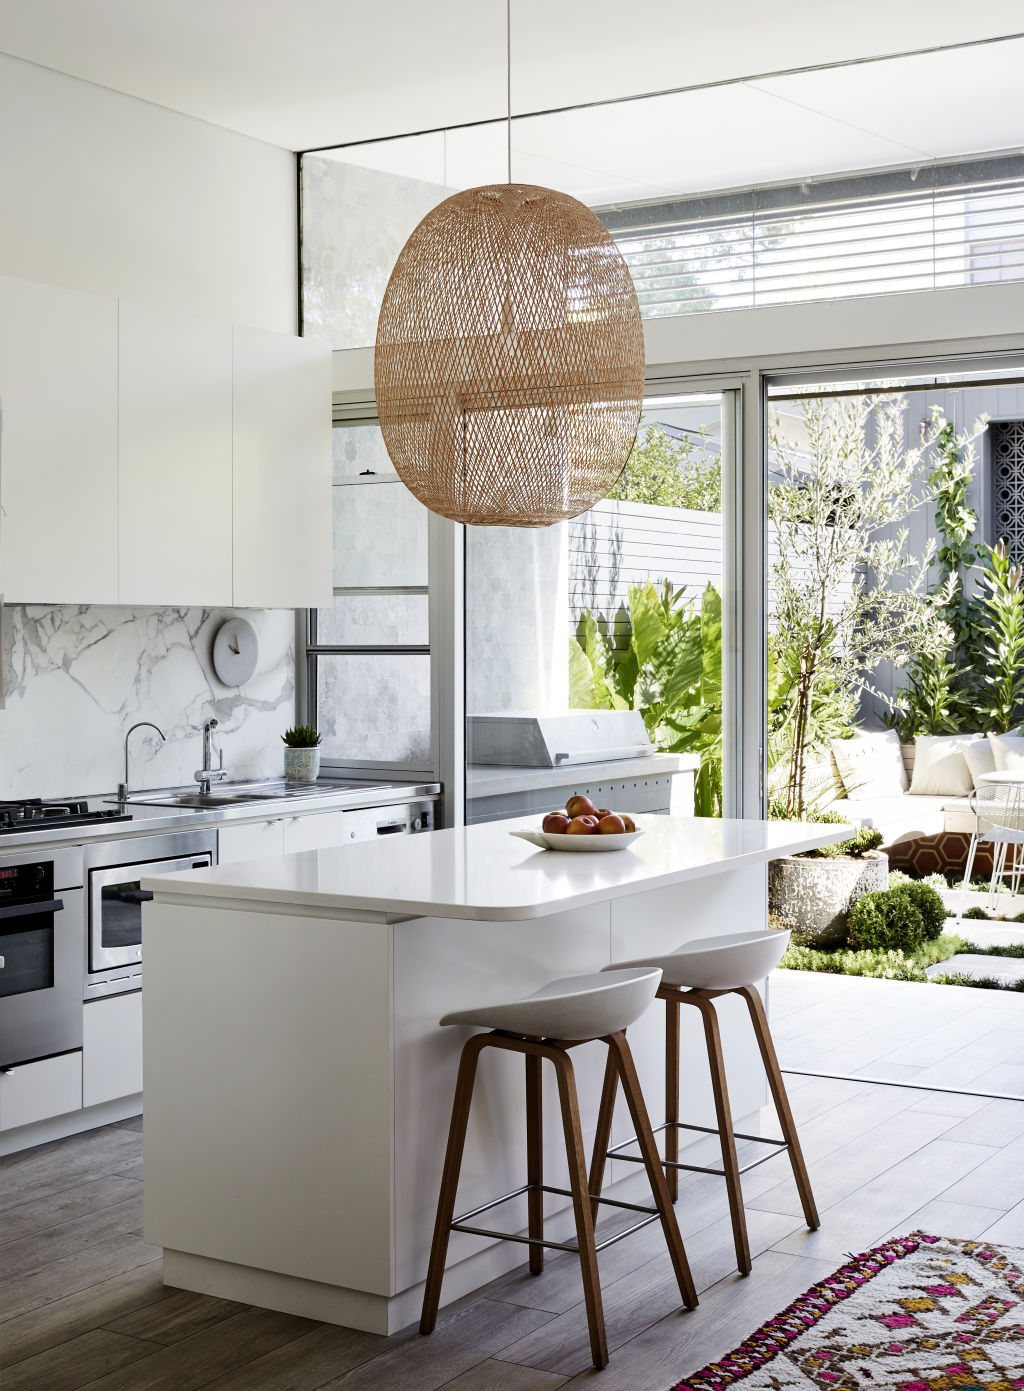 The kitchen looking out to the lush courtyard. Photo: Caitlin Mills Styling: Annie Portelli